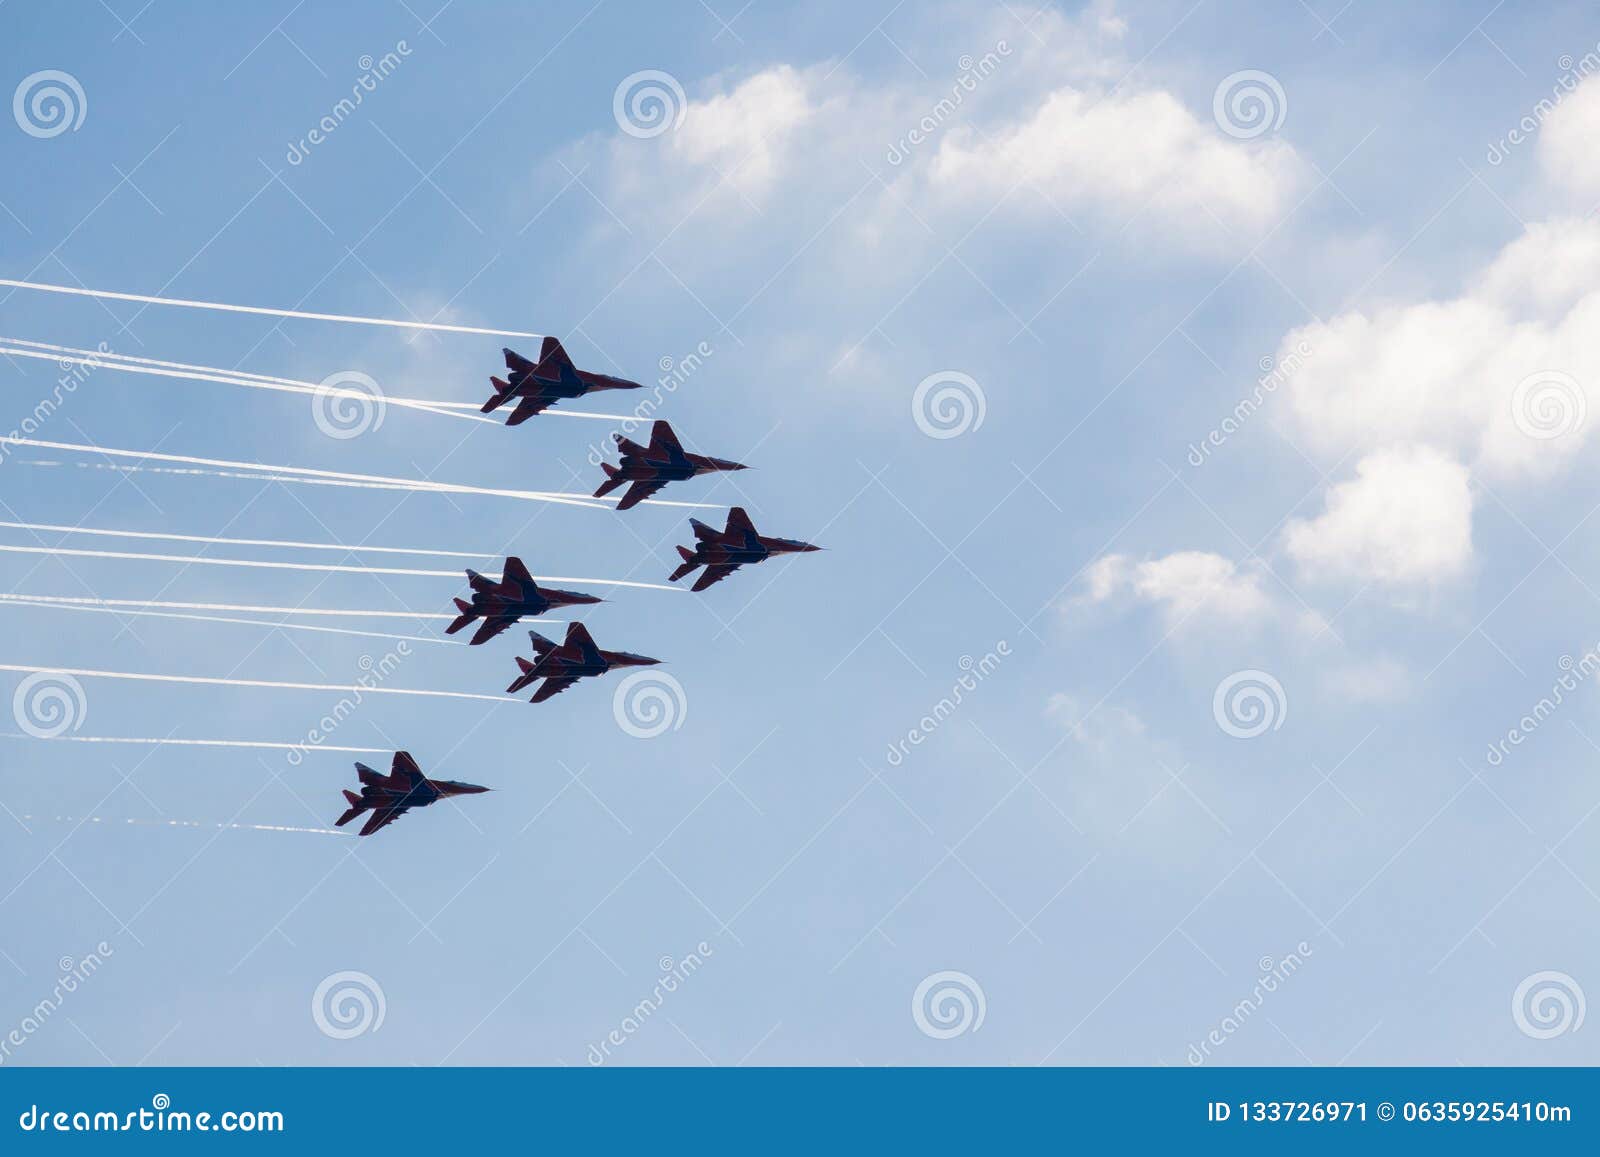 Performance Air Group Swifts at an Air Show Editorial Photo - Image of ...